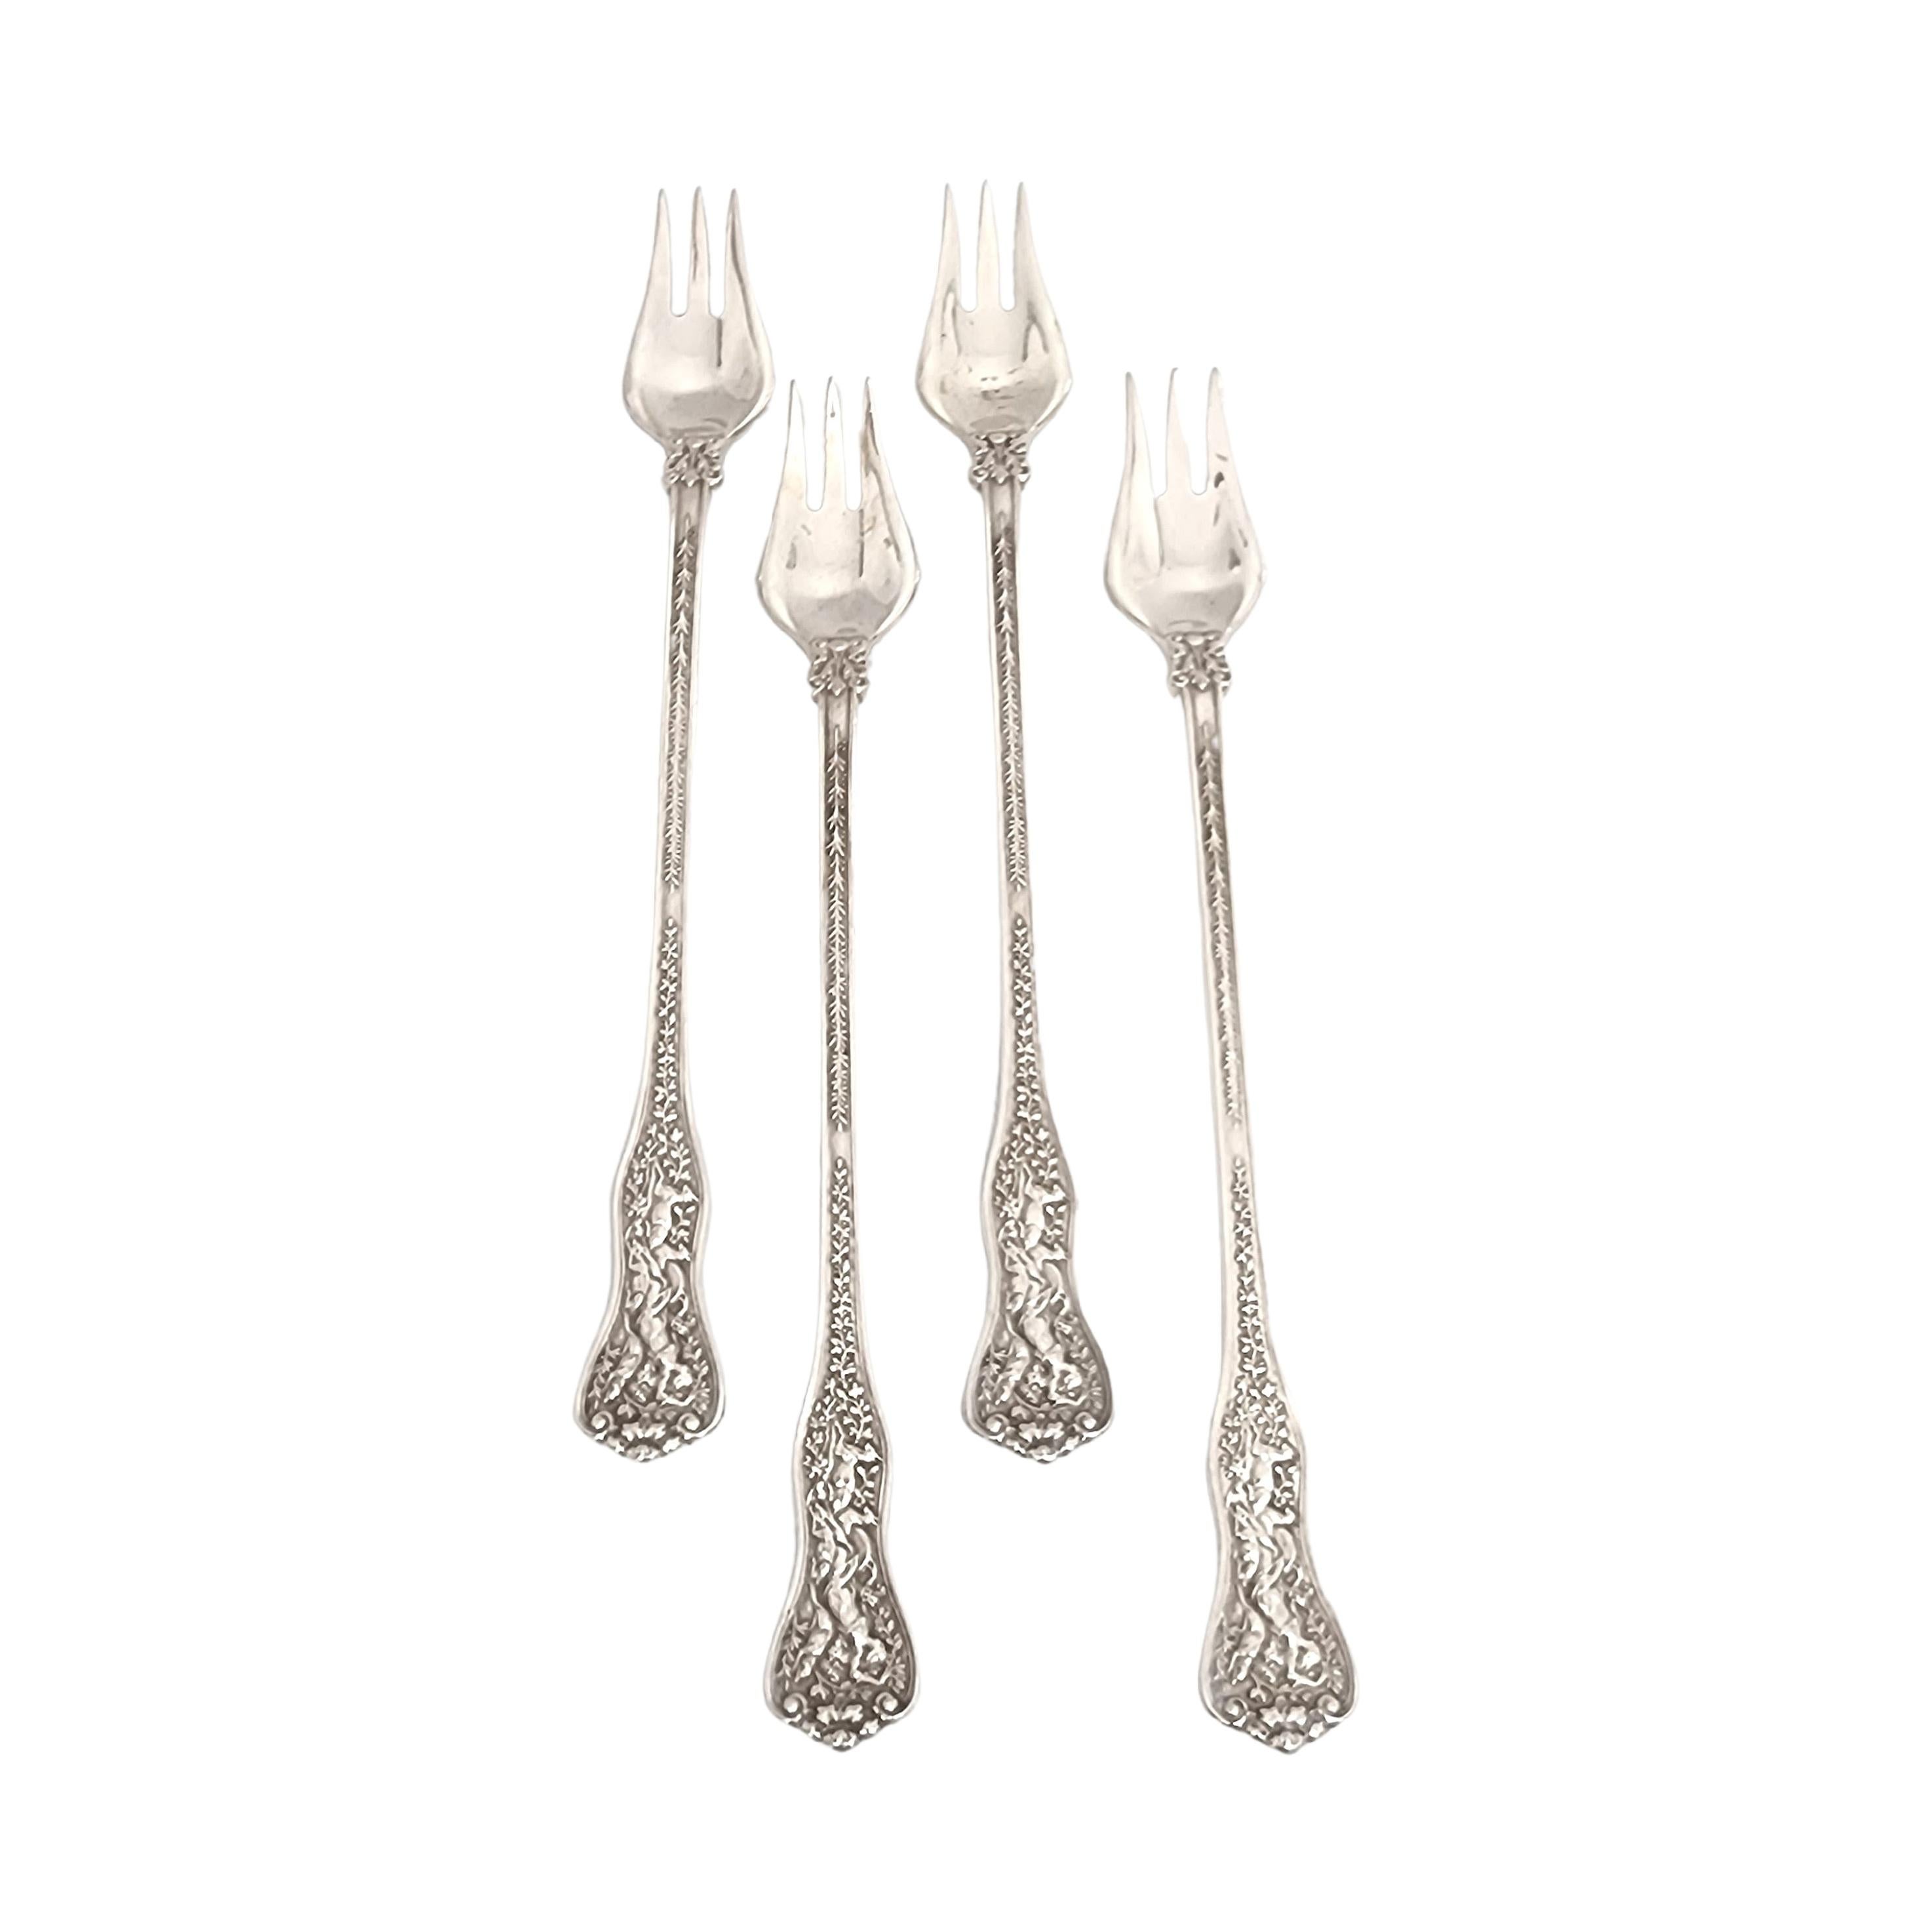 Set of 4 Tiffany & Co Sterling Silver Olympian Cocktail/Oyster Forks 4